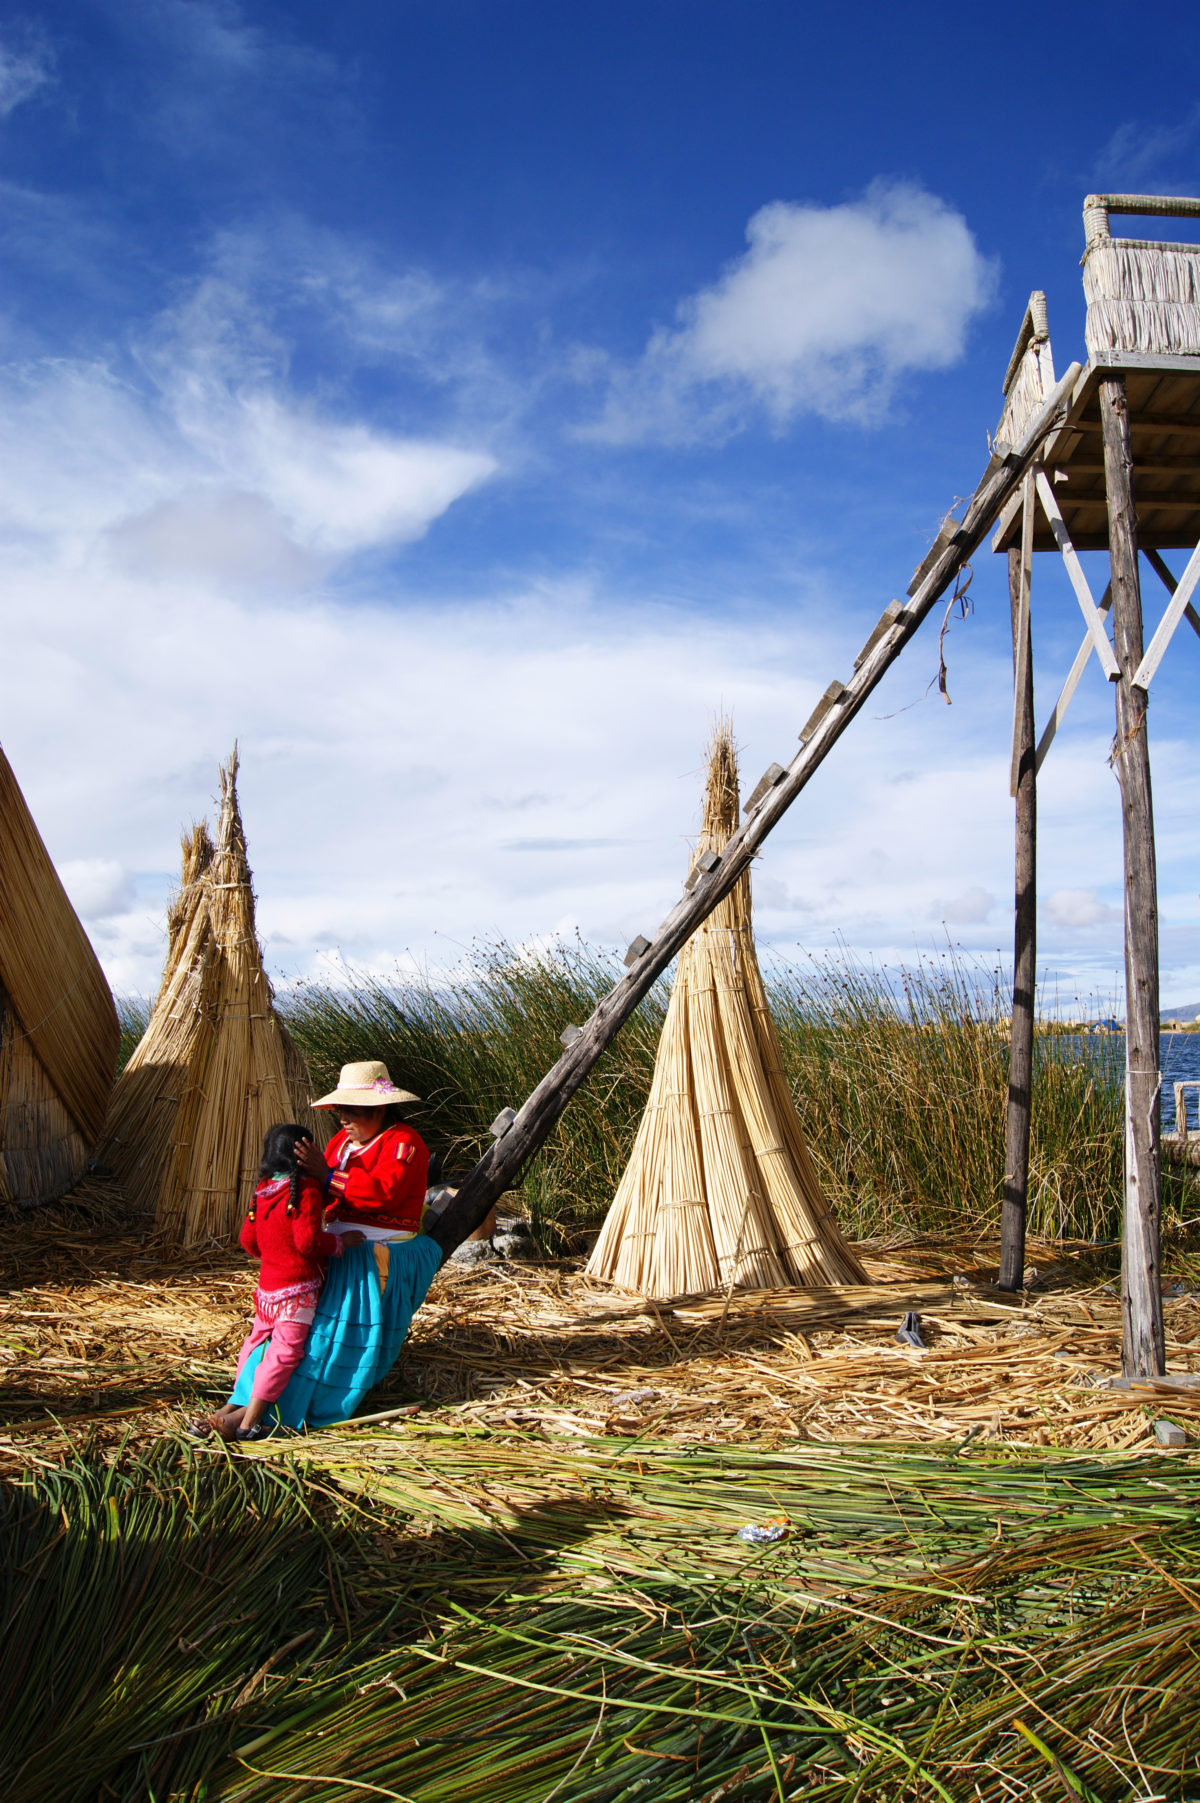 Uros, a floating island of Lake Titicaca where the Ur people live